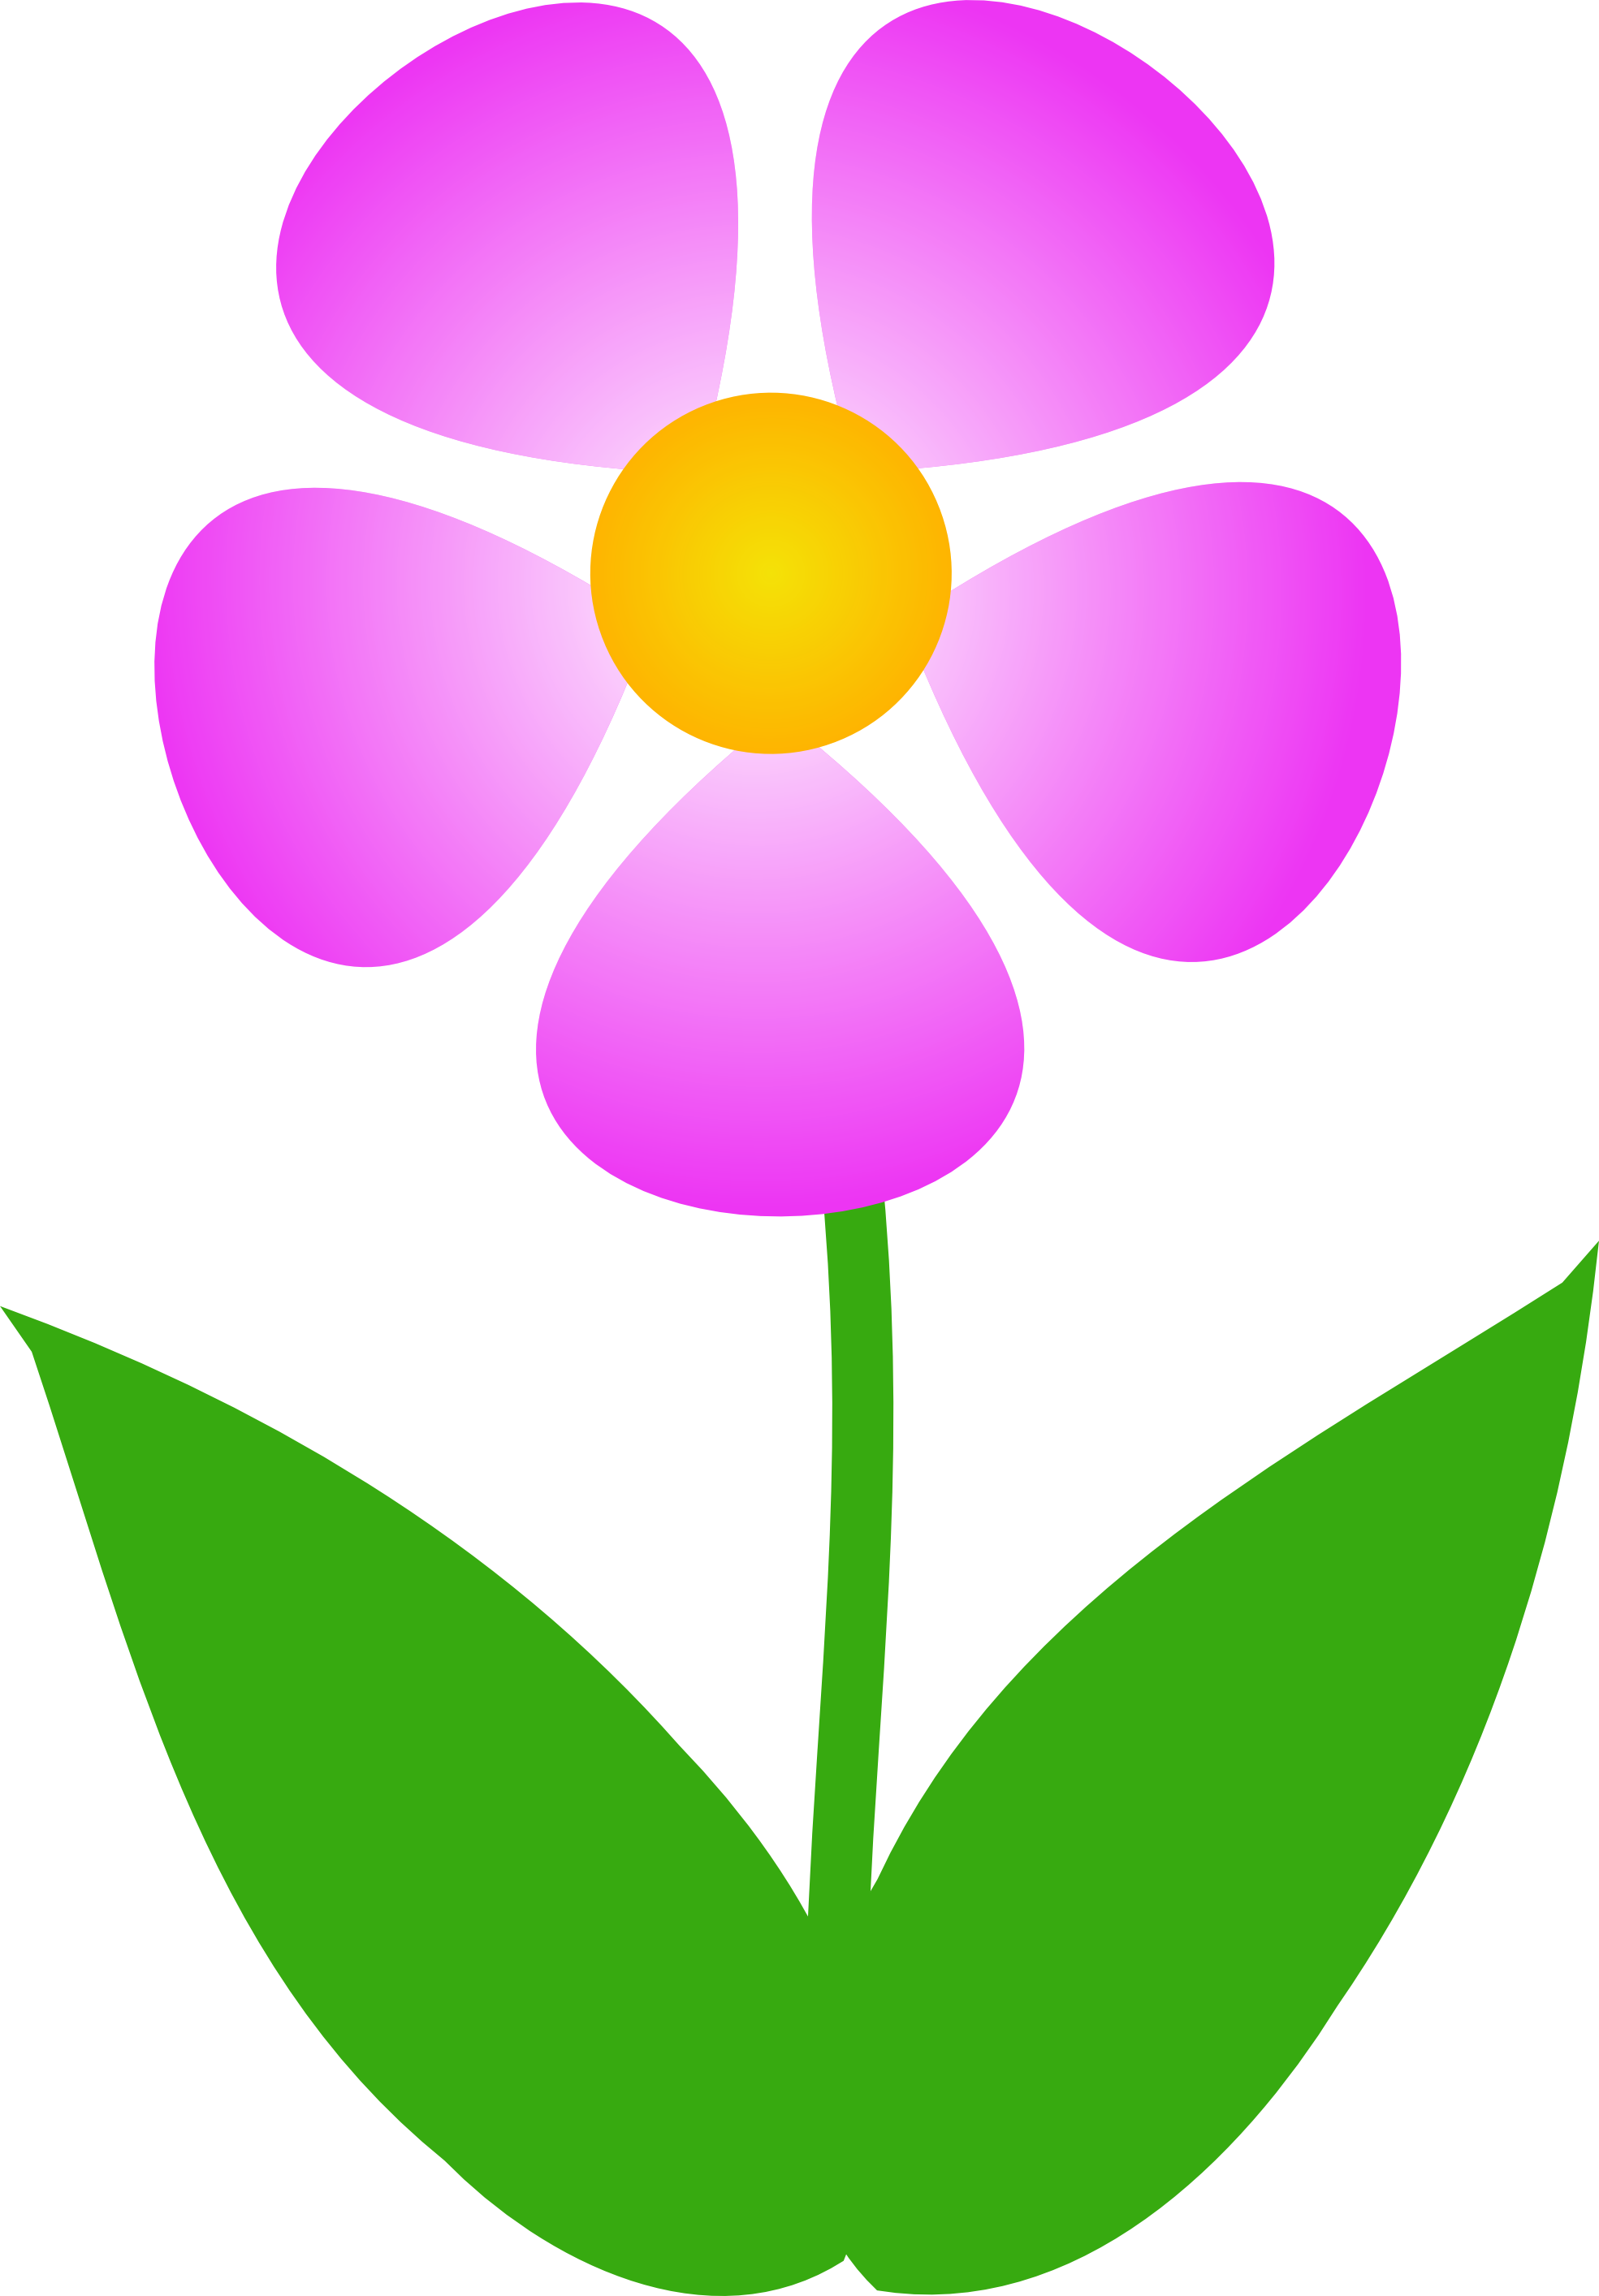 Free clipart images of flower - Flower Images Clipart